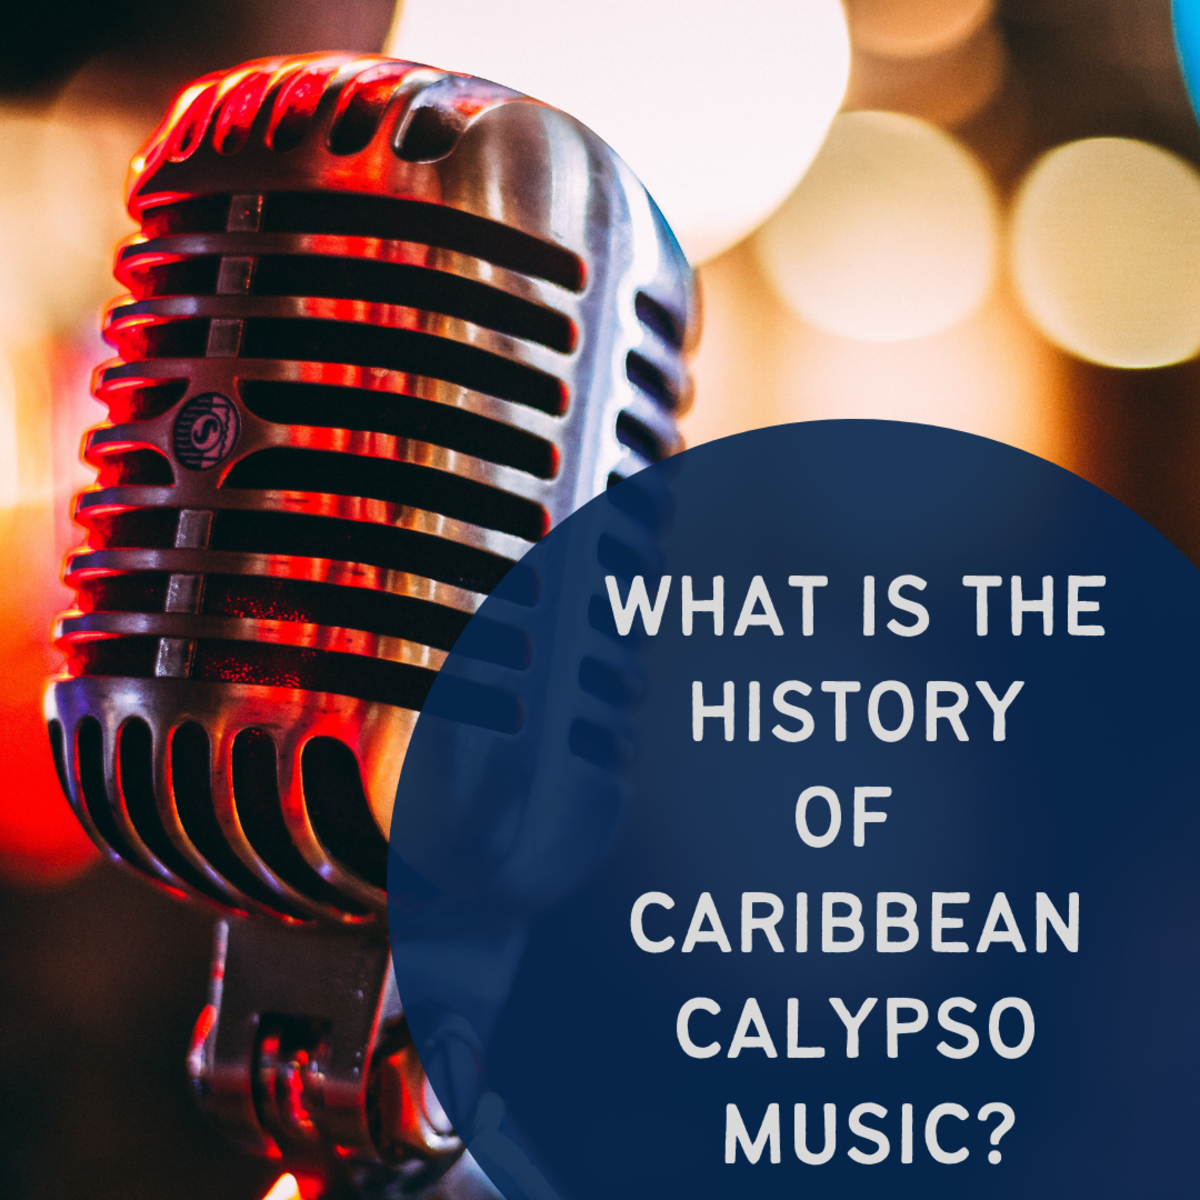 There is a rich musical history to be found in the Caribbean!